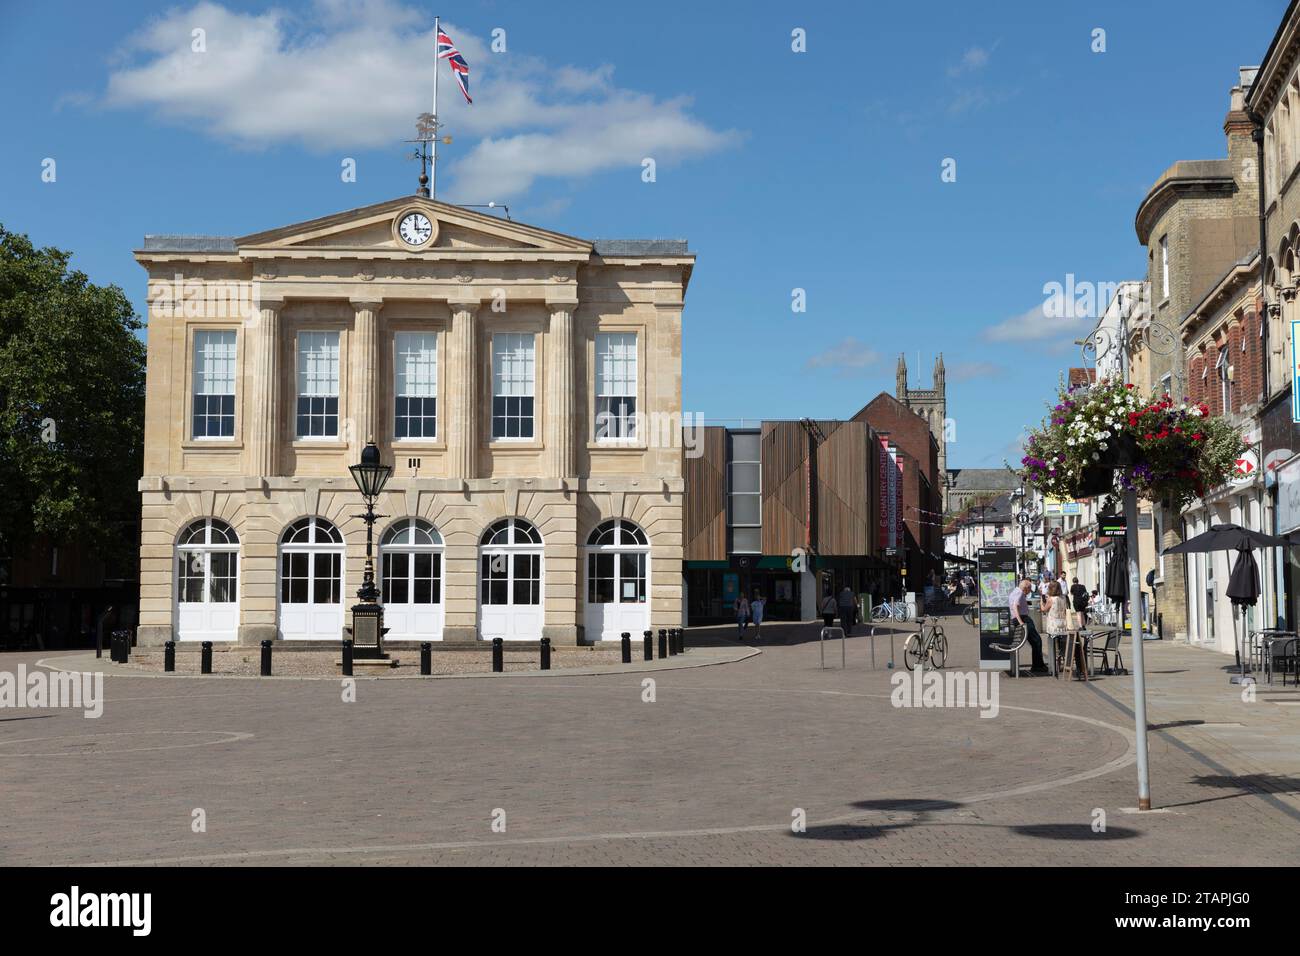 Andover Guildhall and the High Street, Andover, Hampshire, England, United Kingdom, Europe Stock Photo